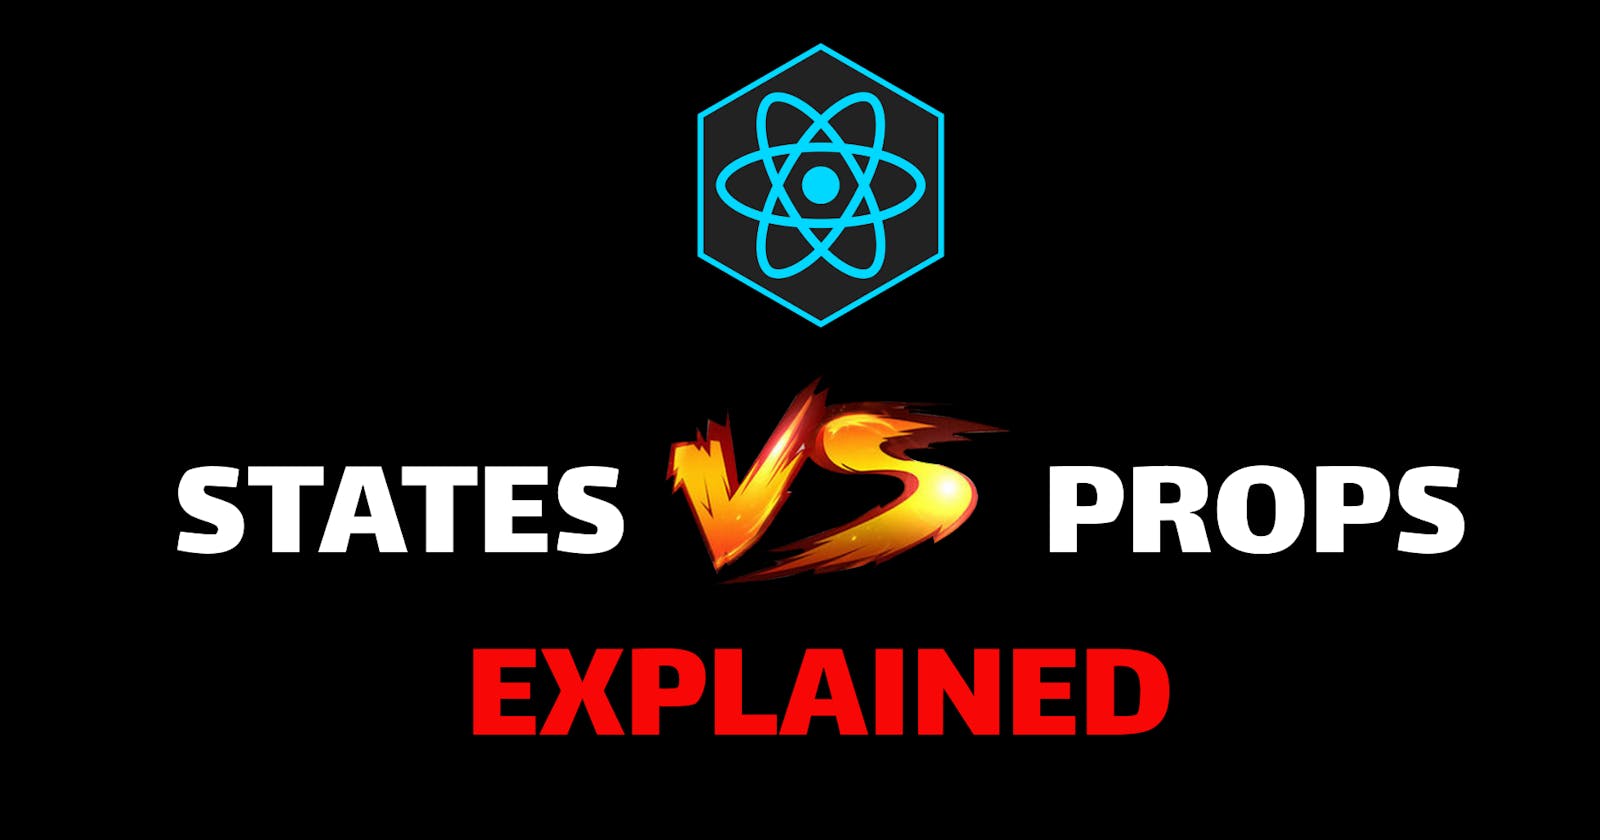 ReactJS: Understanding the Difference between Props and State